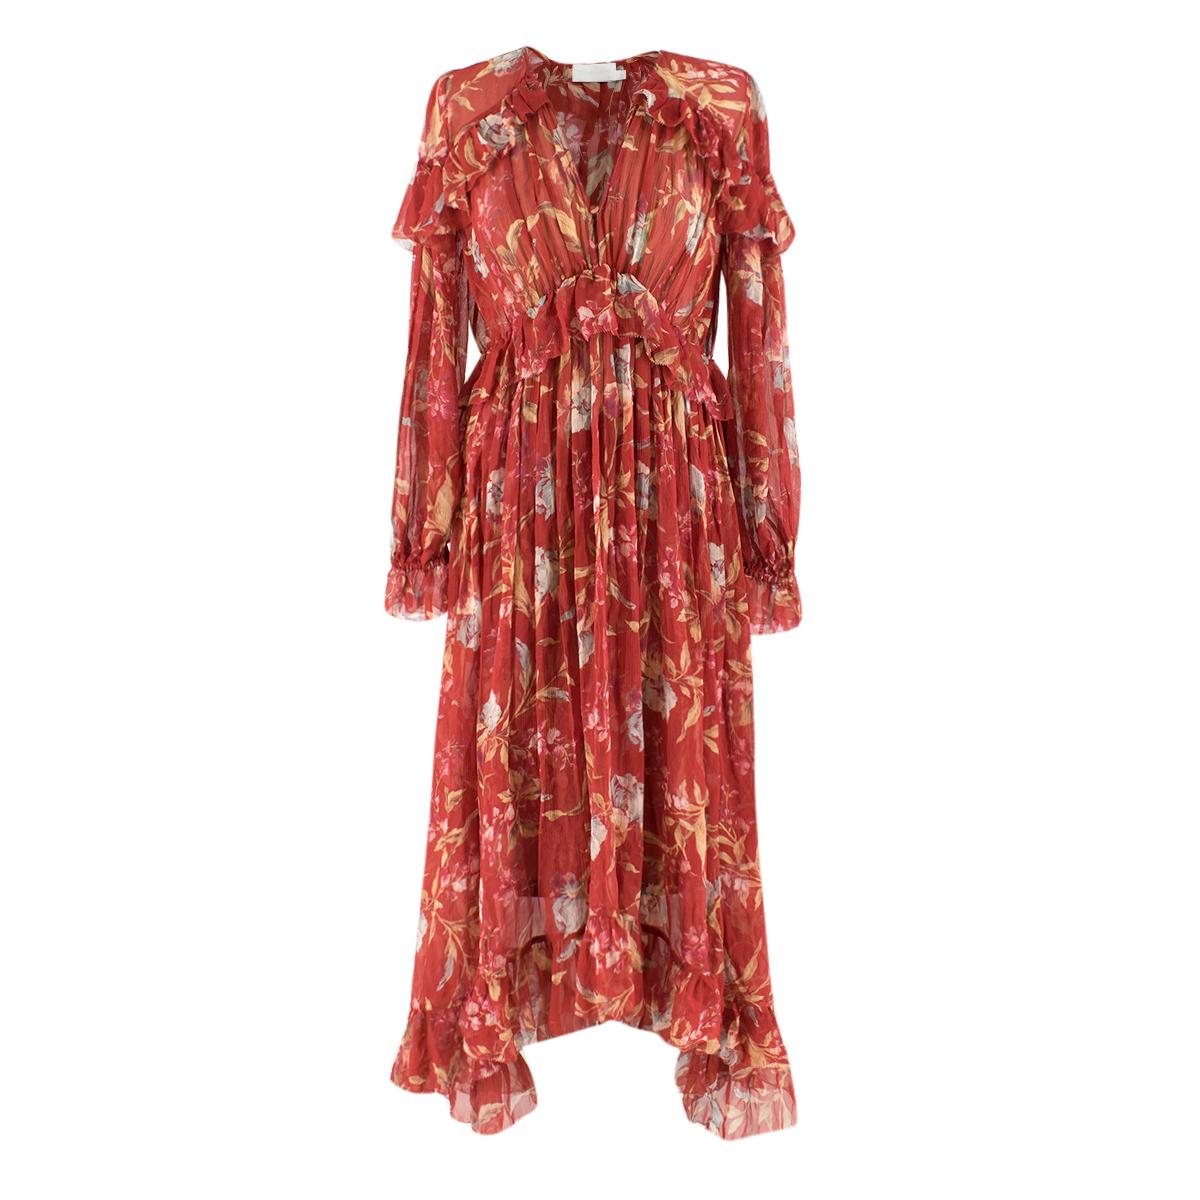 Zimmermann Red Gathered Frill Midi Dress

-Material- 97% polyester, 3% elastane
-multicoloured floral design
-comes with matching jersey slip dress
-gathered frill beneath bust and at hem
-full length sleeves with picot frill